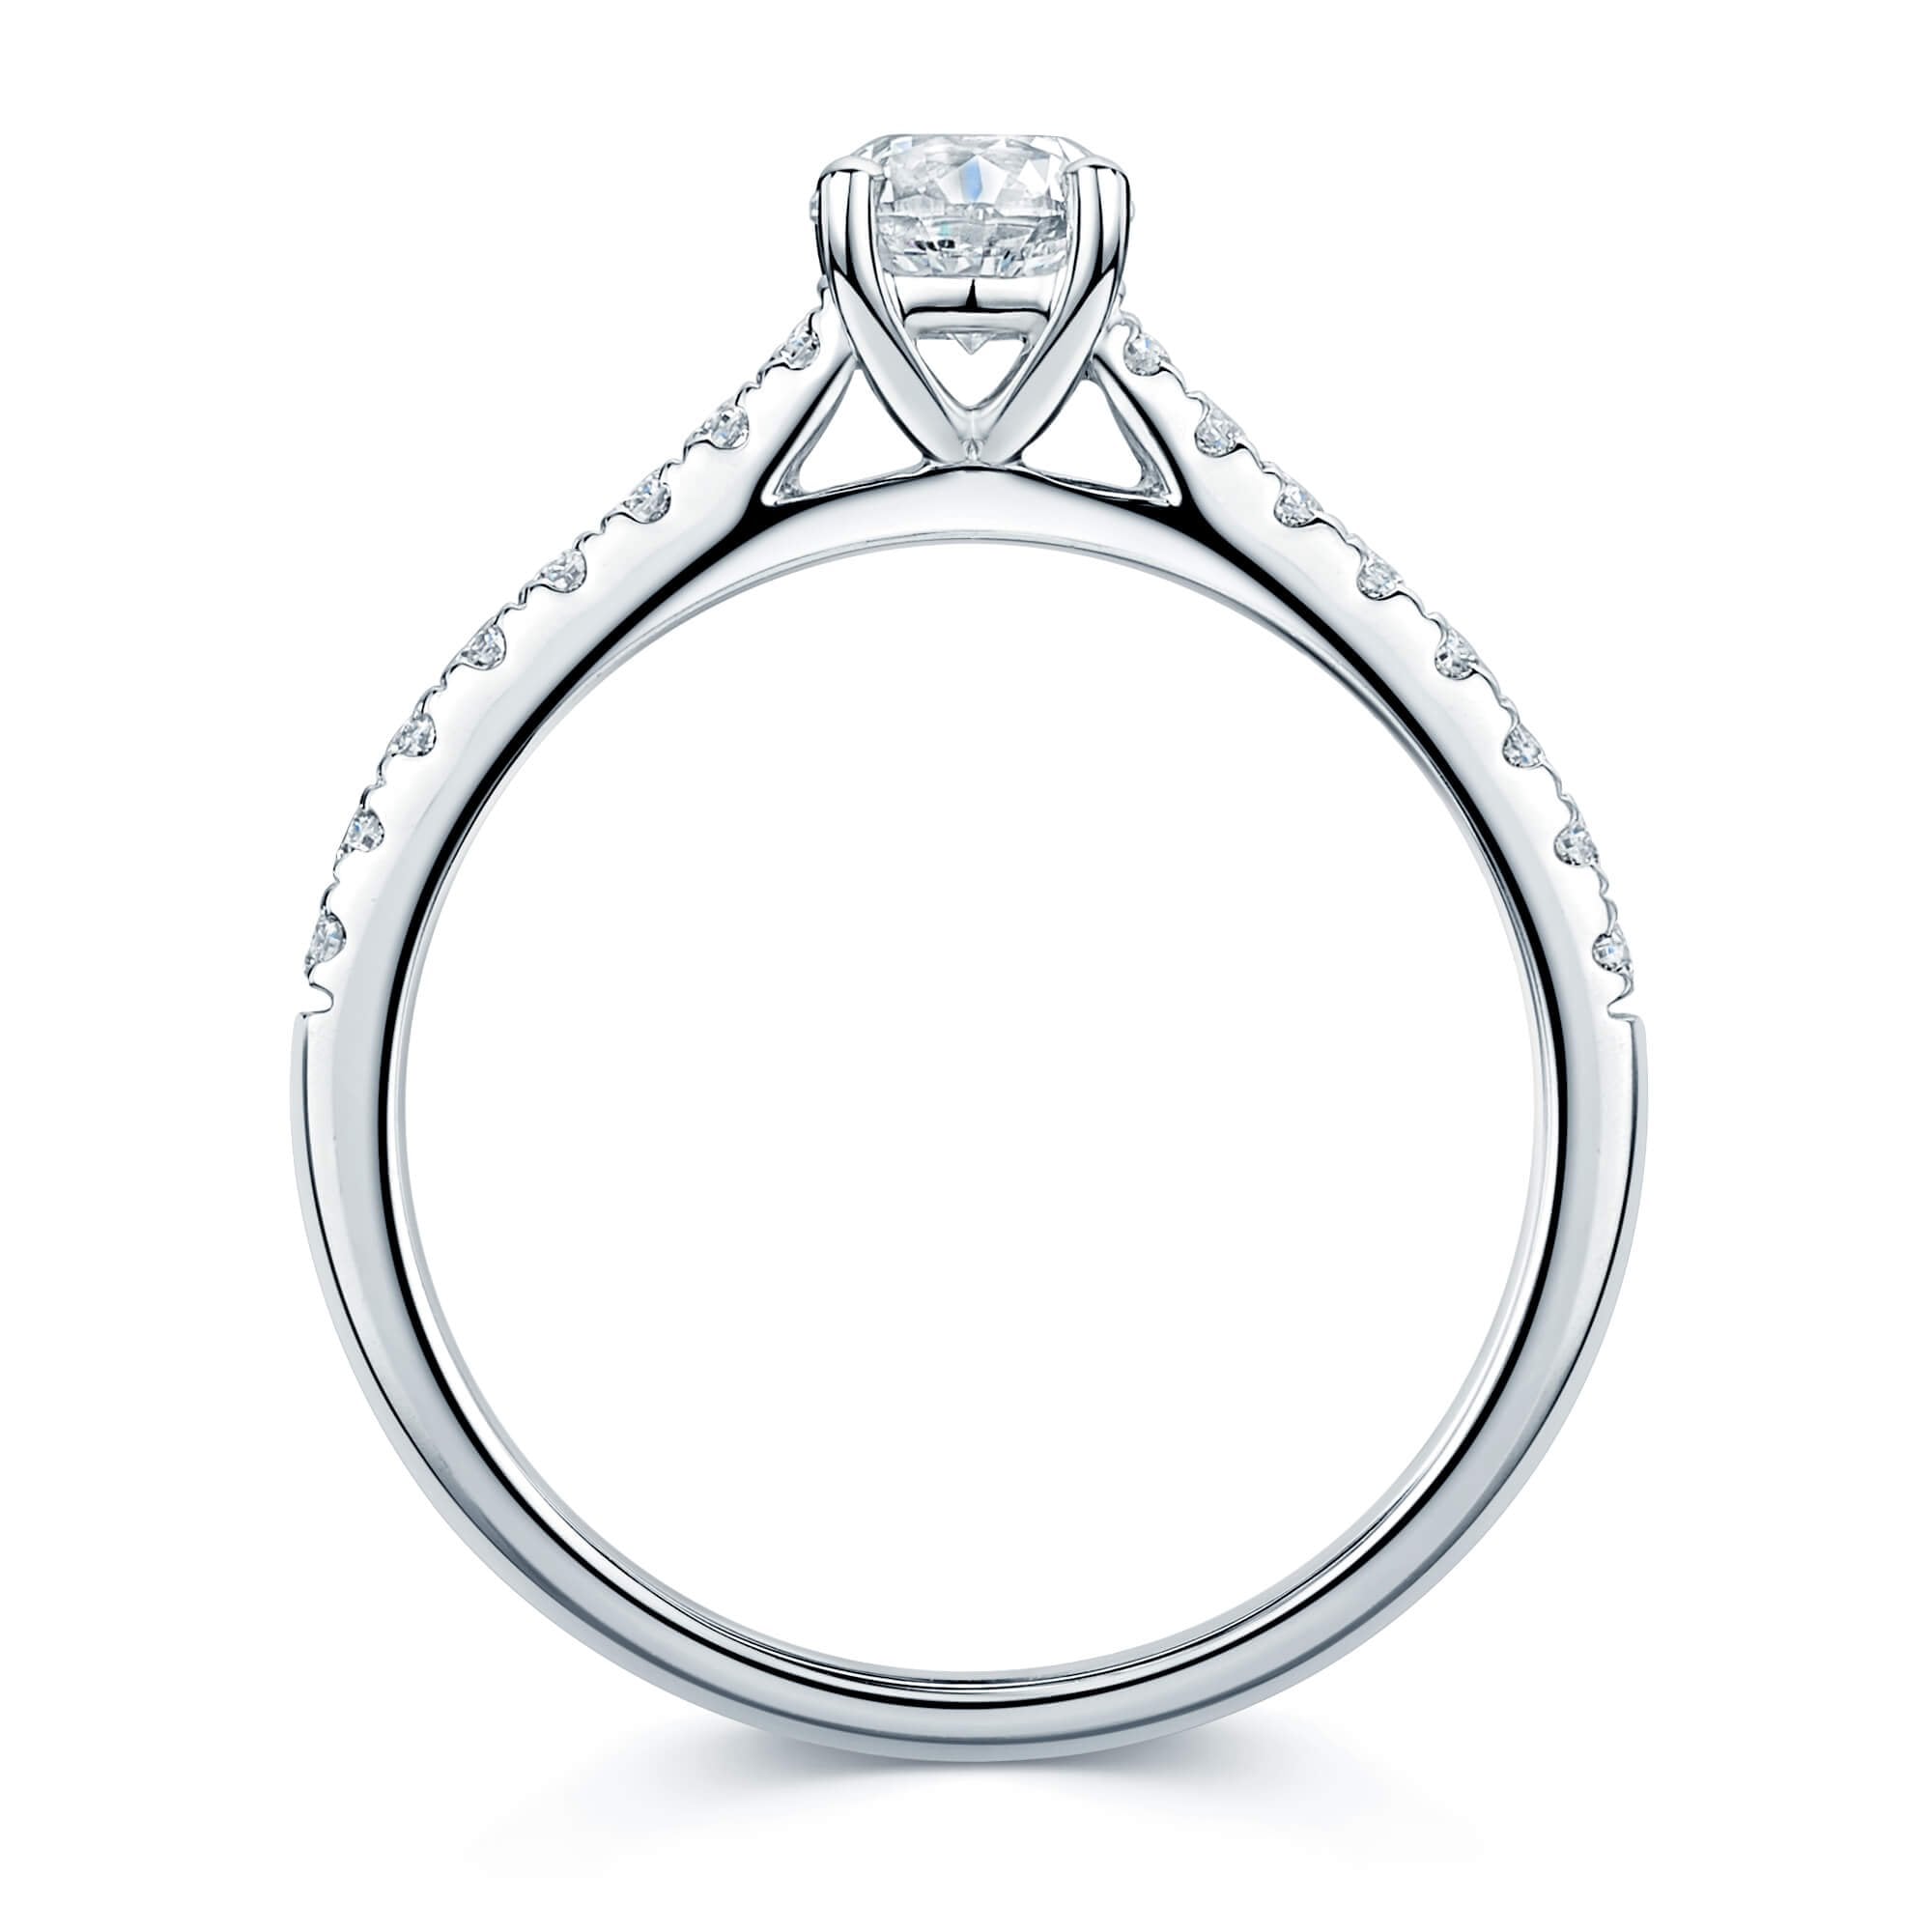 Simply Solitaire Collection Platinum Set Diamond Solitaire Engagement Ring With Diamond Shoulders GIA Certified 0.50 Carat